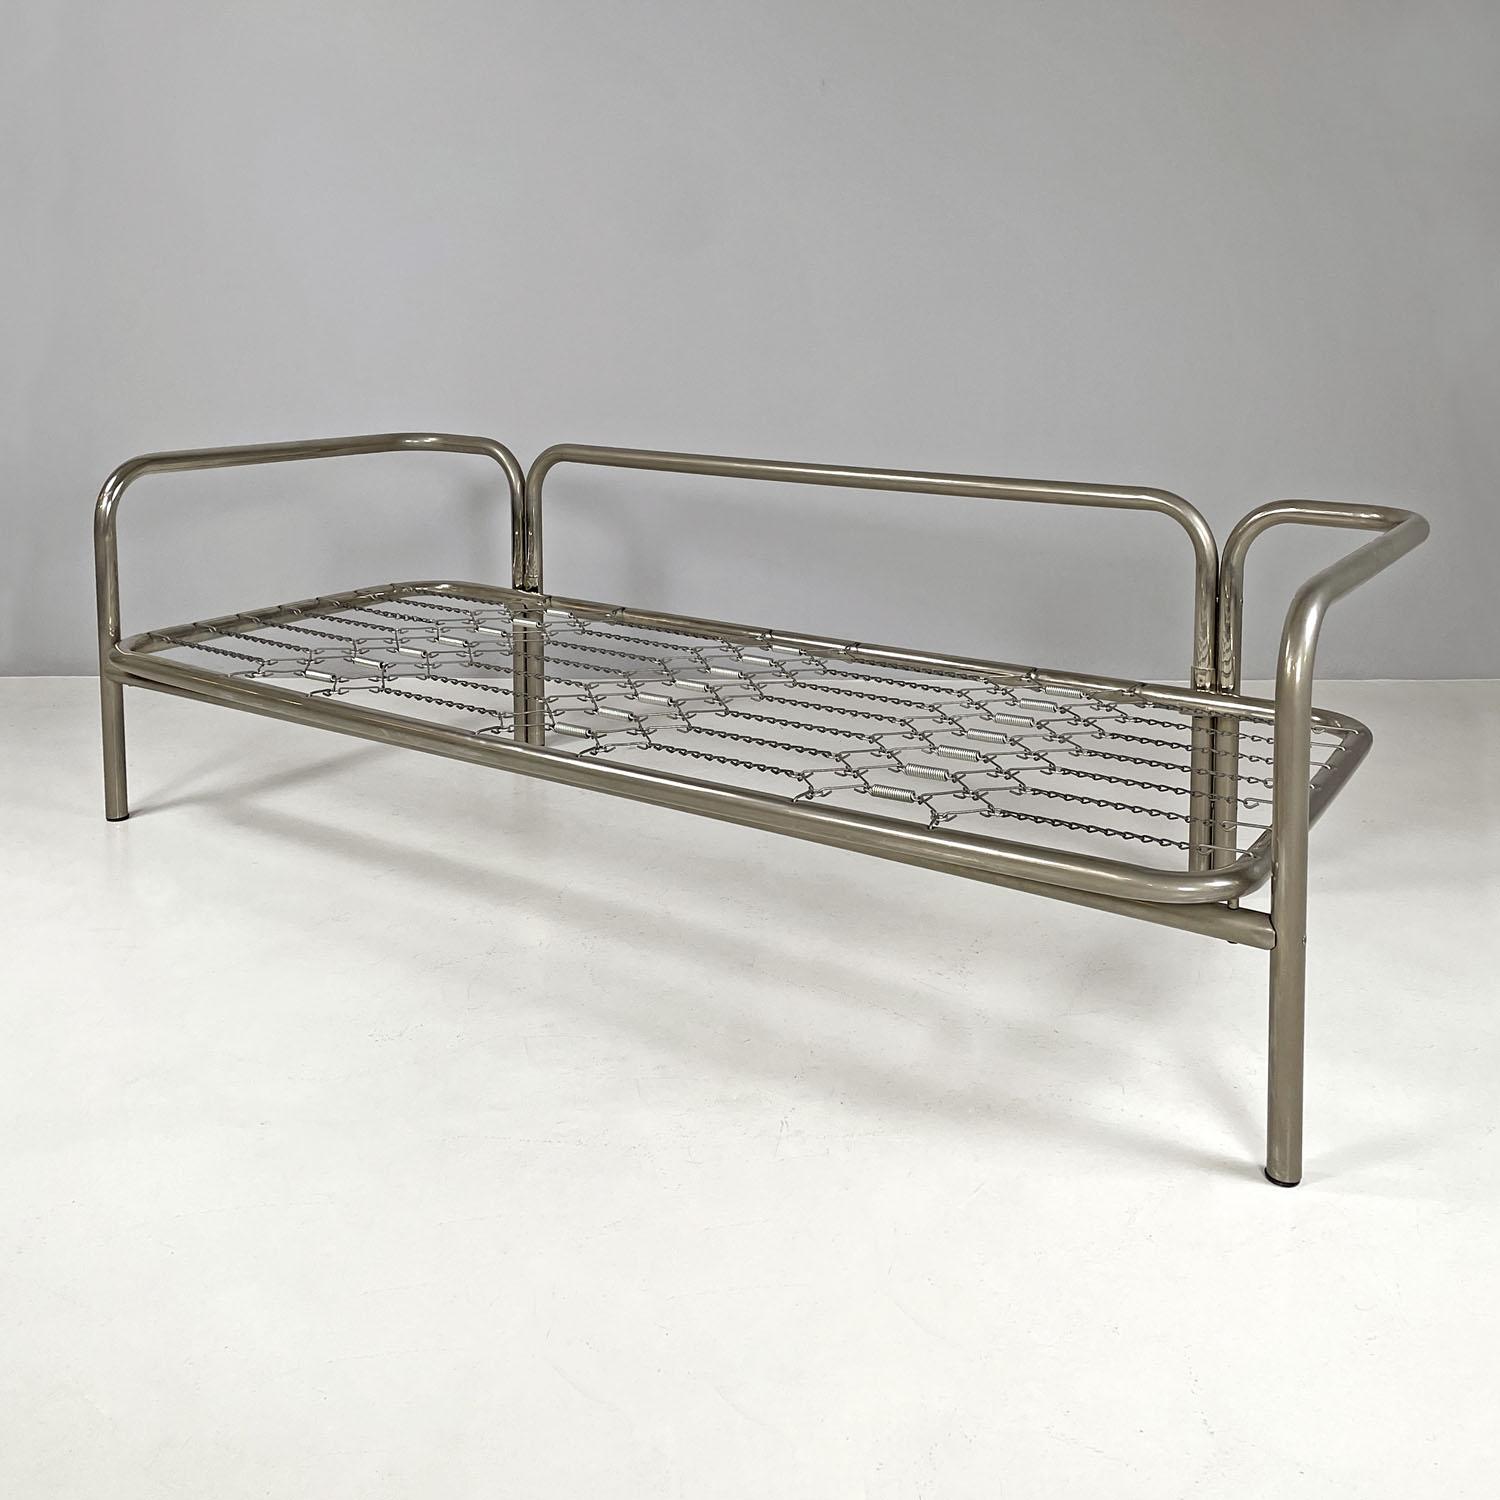 Italian modern daybed sofa Locus Solus by Gae Aulenti for Poltronova, 1970s
Daybed mod. Locus Solus with patina chromed metal structure. The structure is entirely in tubular, which is shaped by bending to form the backrest and armrests. The seat is